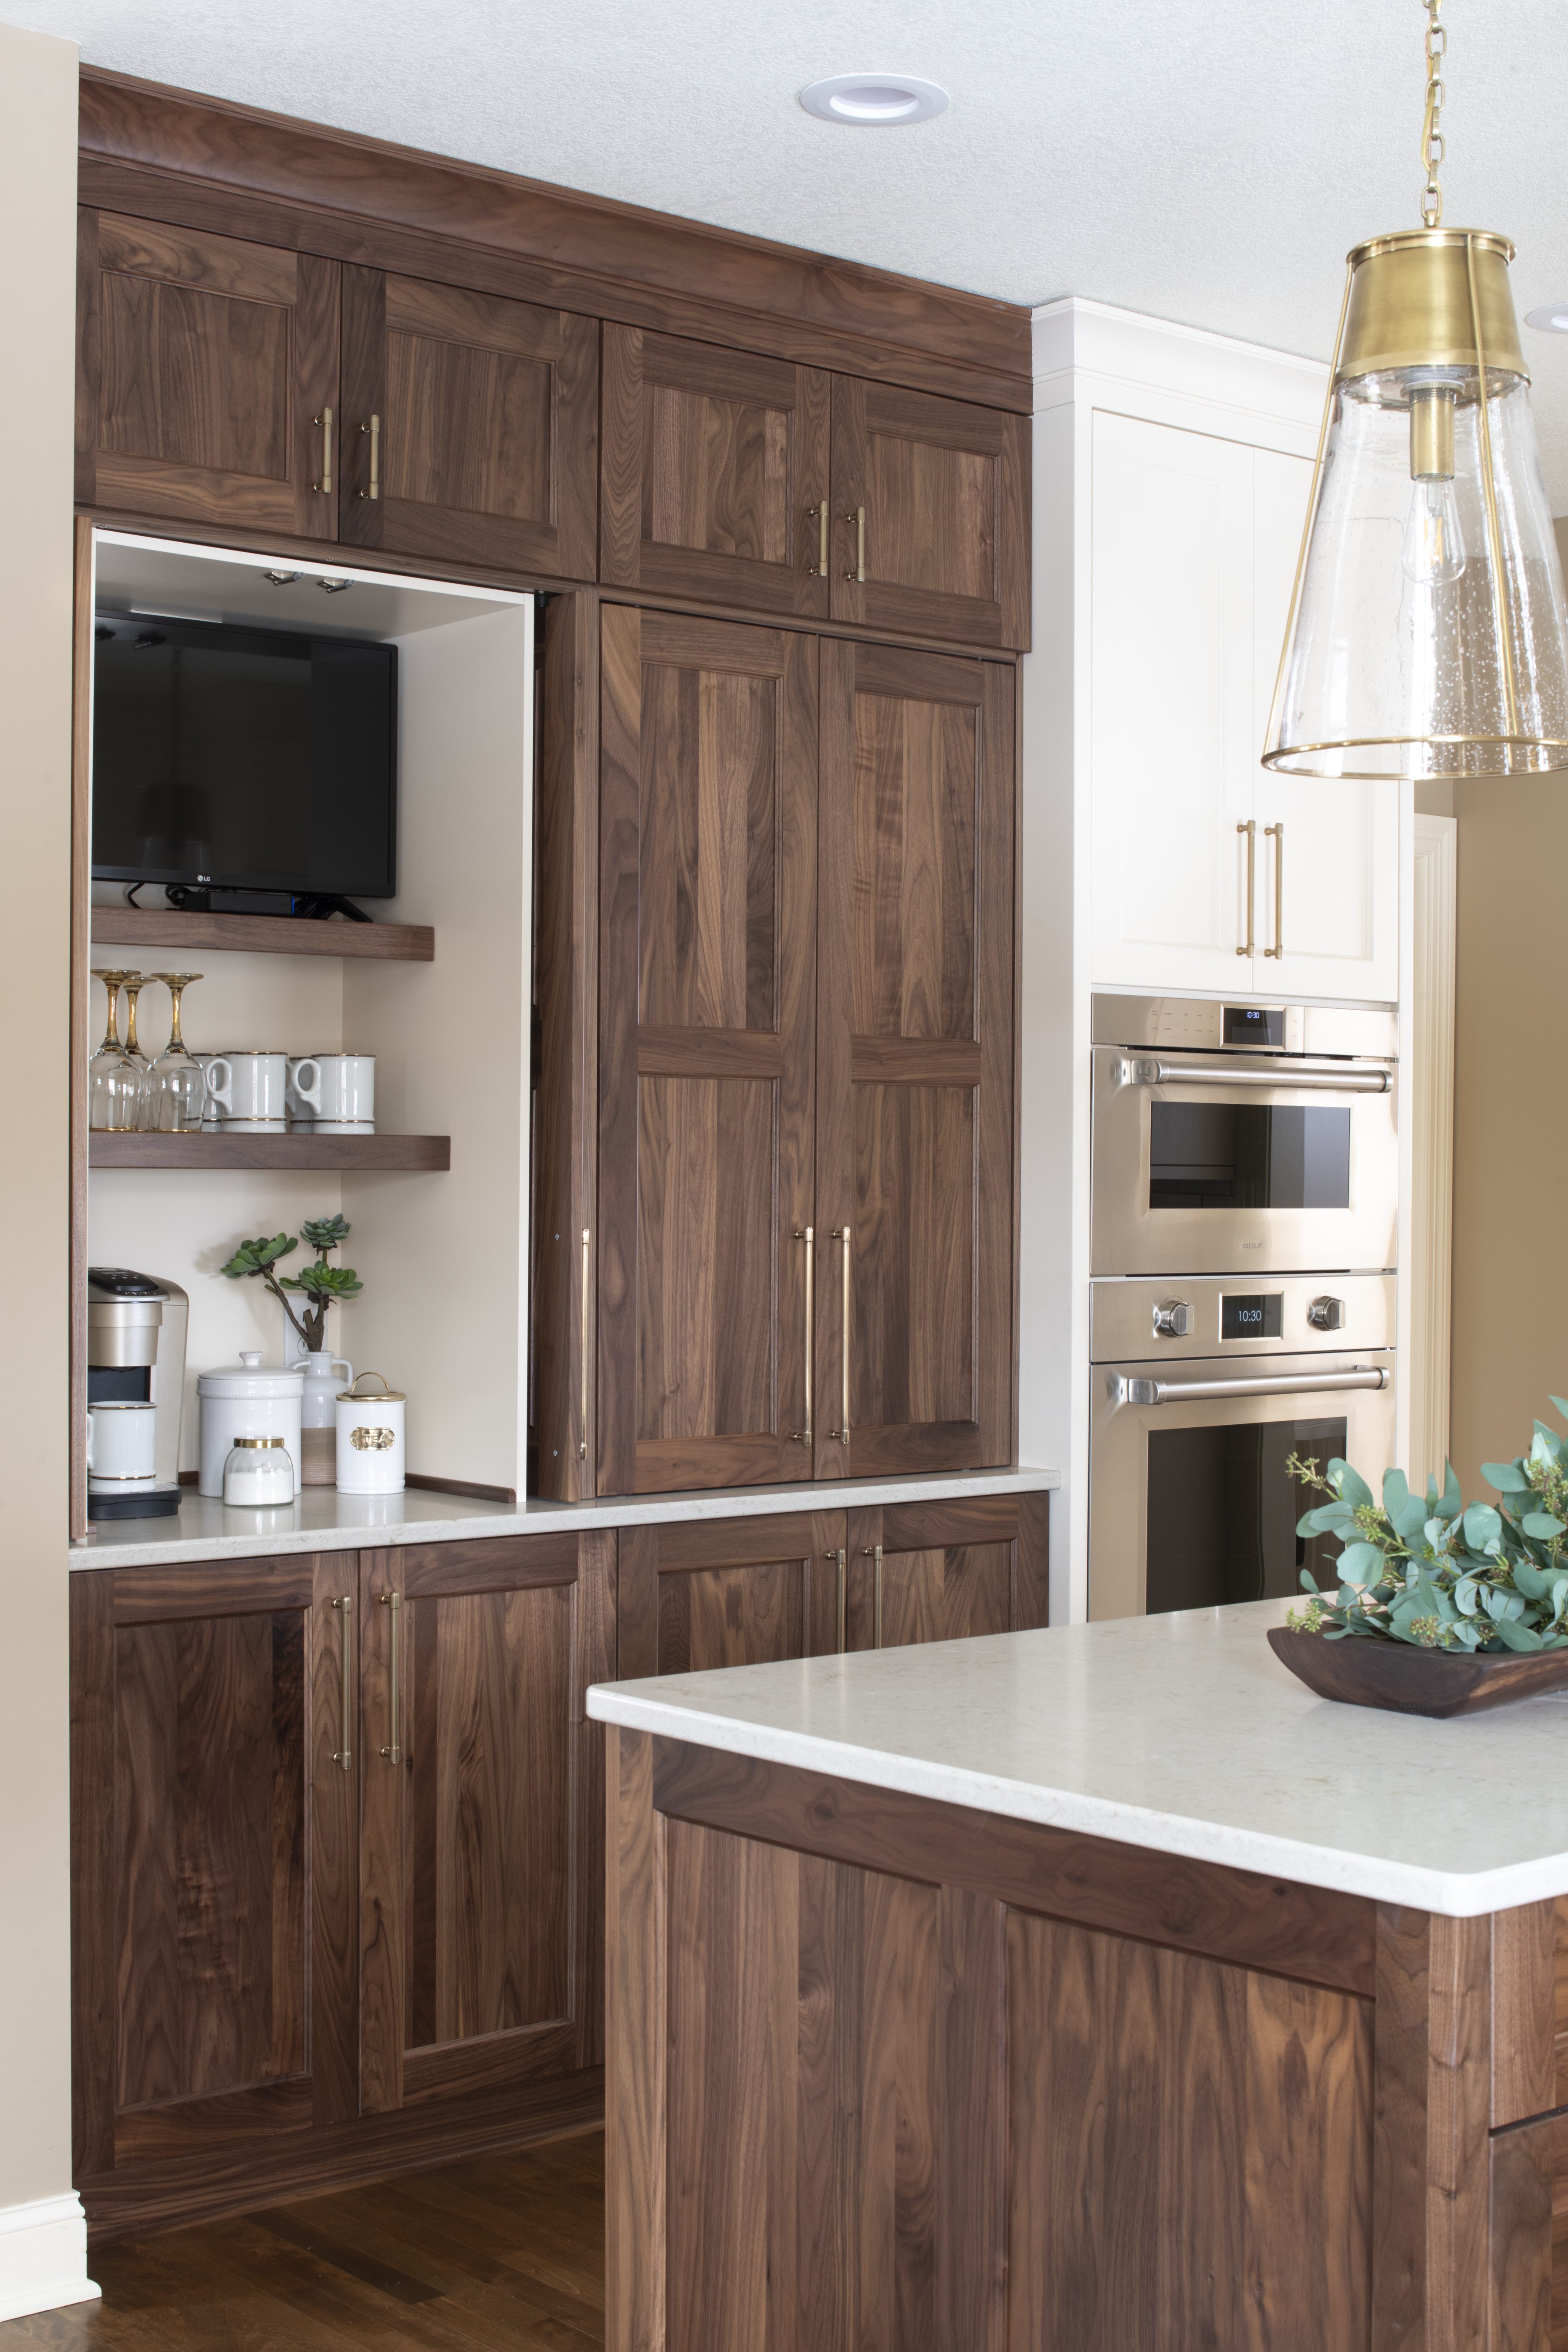 Walnut Cabinetry and Coffee Bar in Kitchen